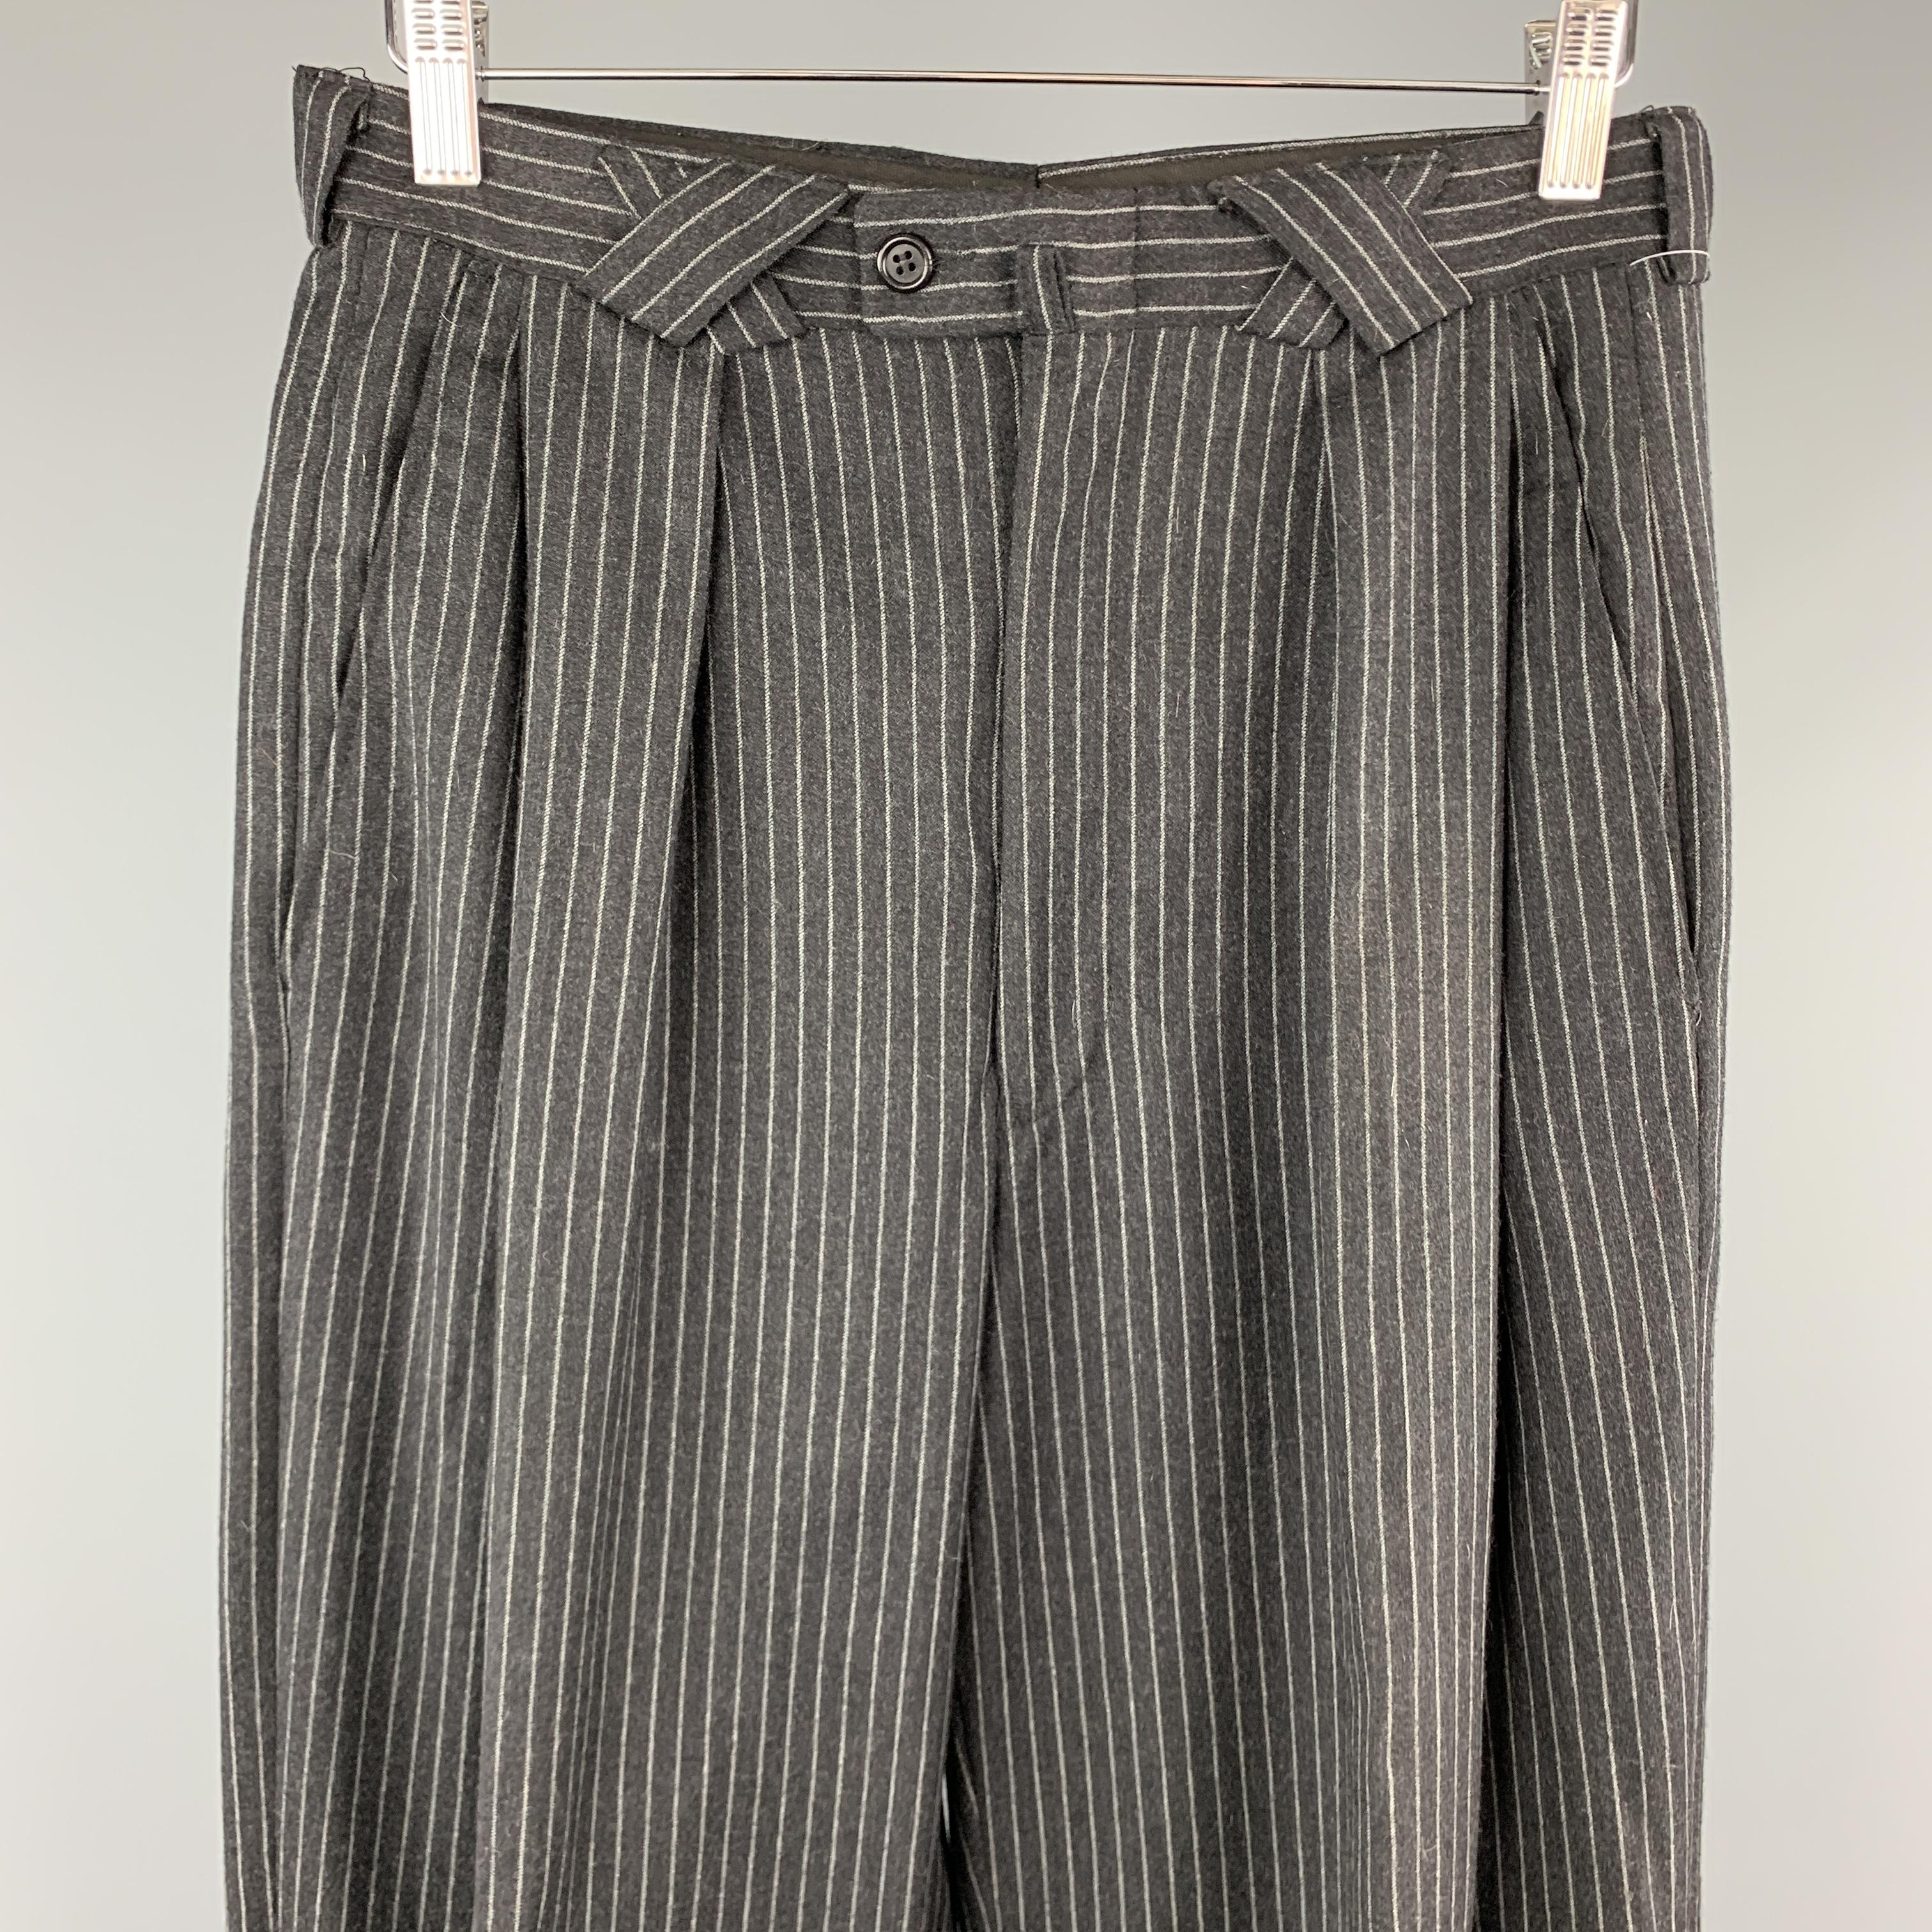 VERSACE CLASSIC V2 dress pants come in charcoal gray pinstriped wool with a x loop waistband, cuffed hem, and pleated wide leg. Made in Italy.

Excellent Pre-Owned Condition.
Marked: 32 R

Measurements:

Waist: 29 in.
Rise: 13 in.
Inseam: 29 in.
Leg